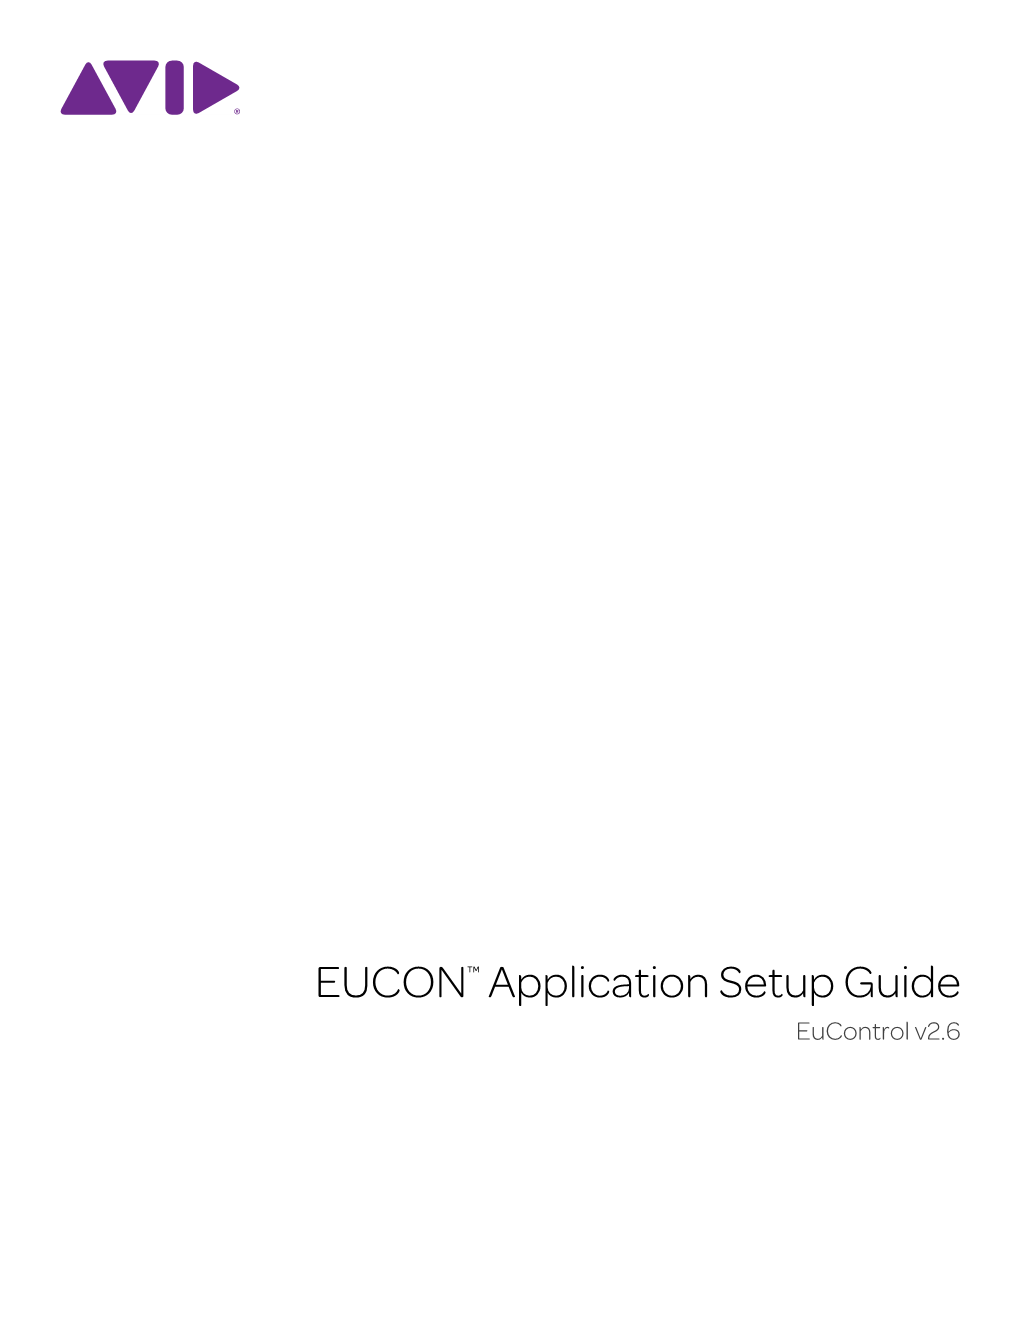 EUCON Application Setup Guide Chapter 1: Introduction